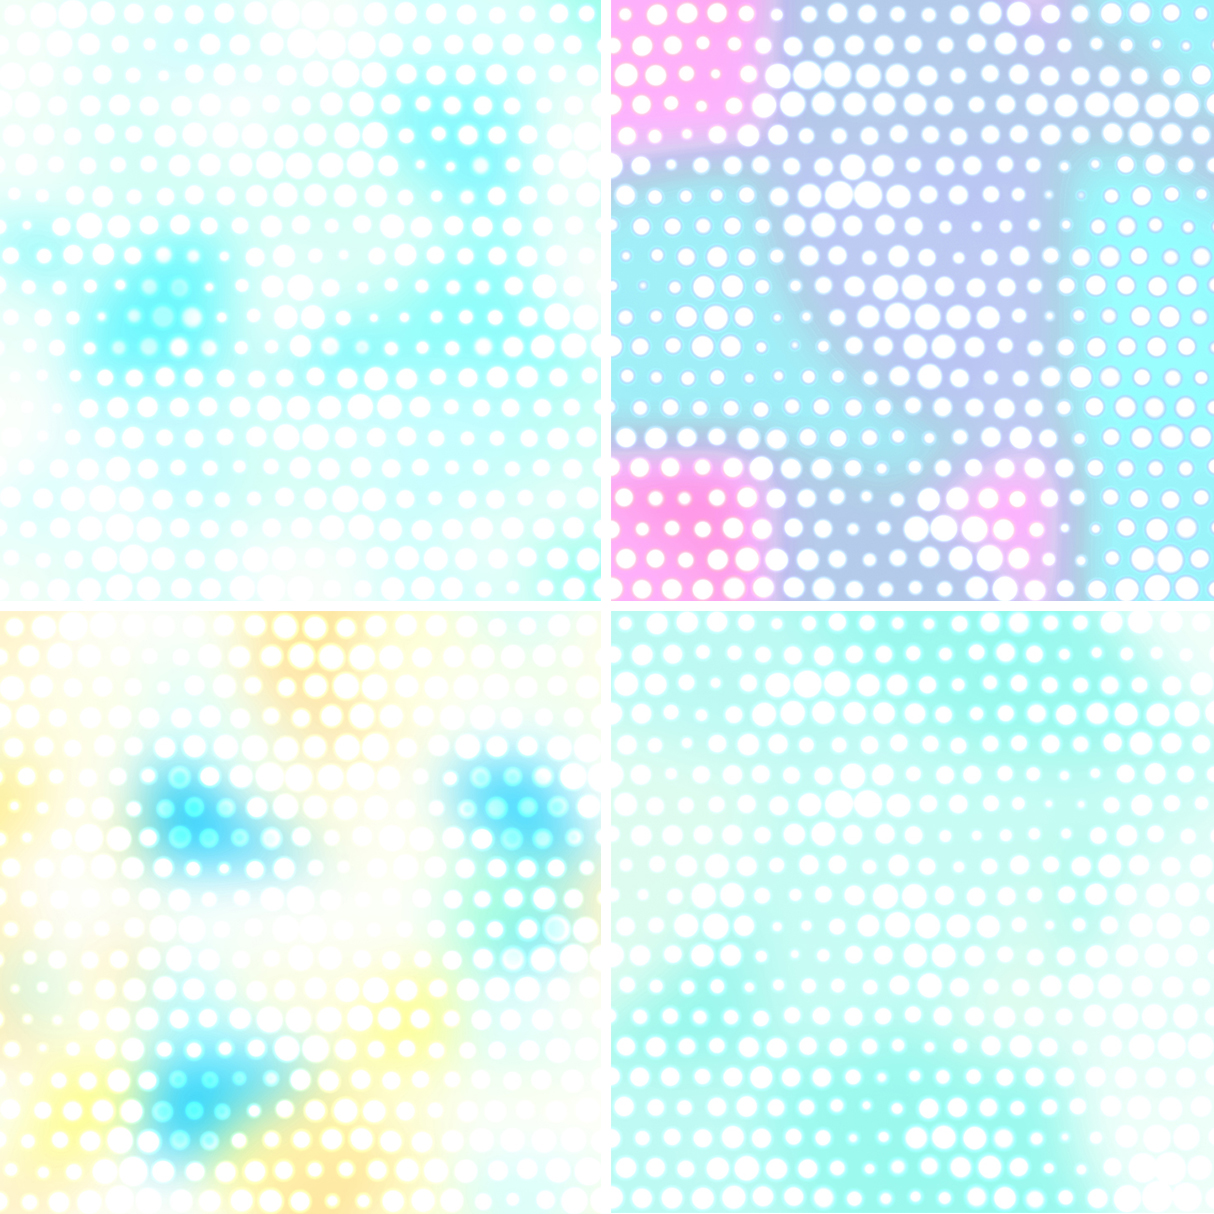 50 Shining Dotty Backgrounds Samples Preview – Part 10